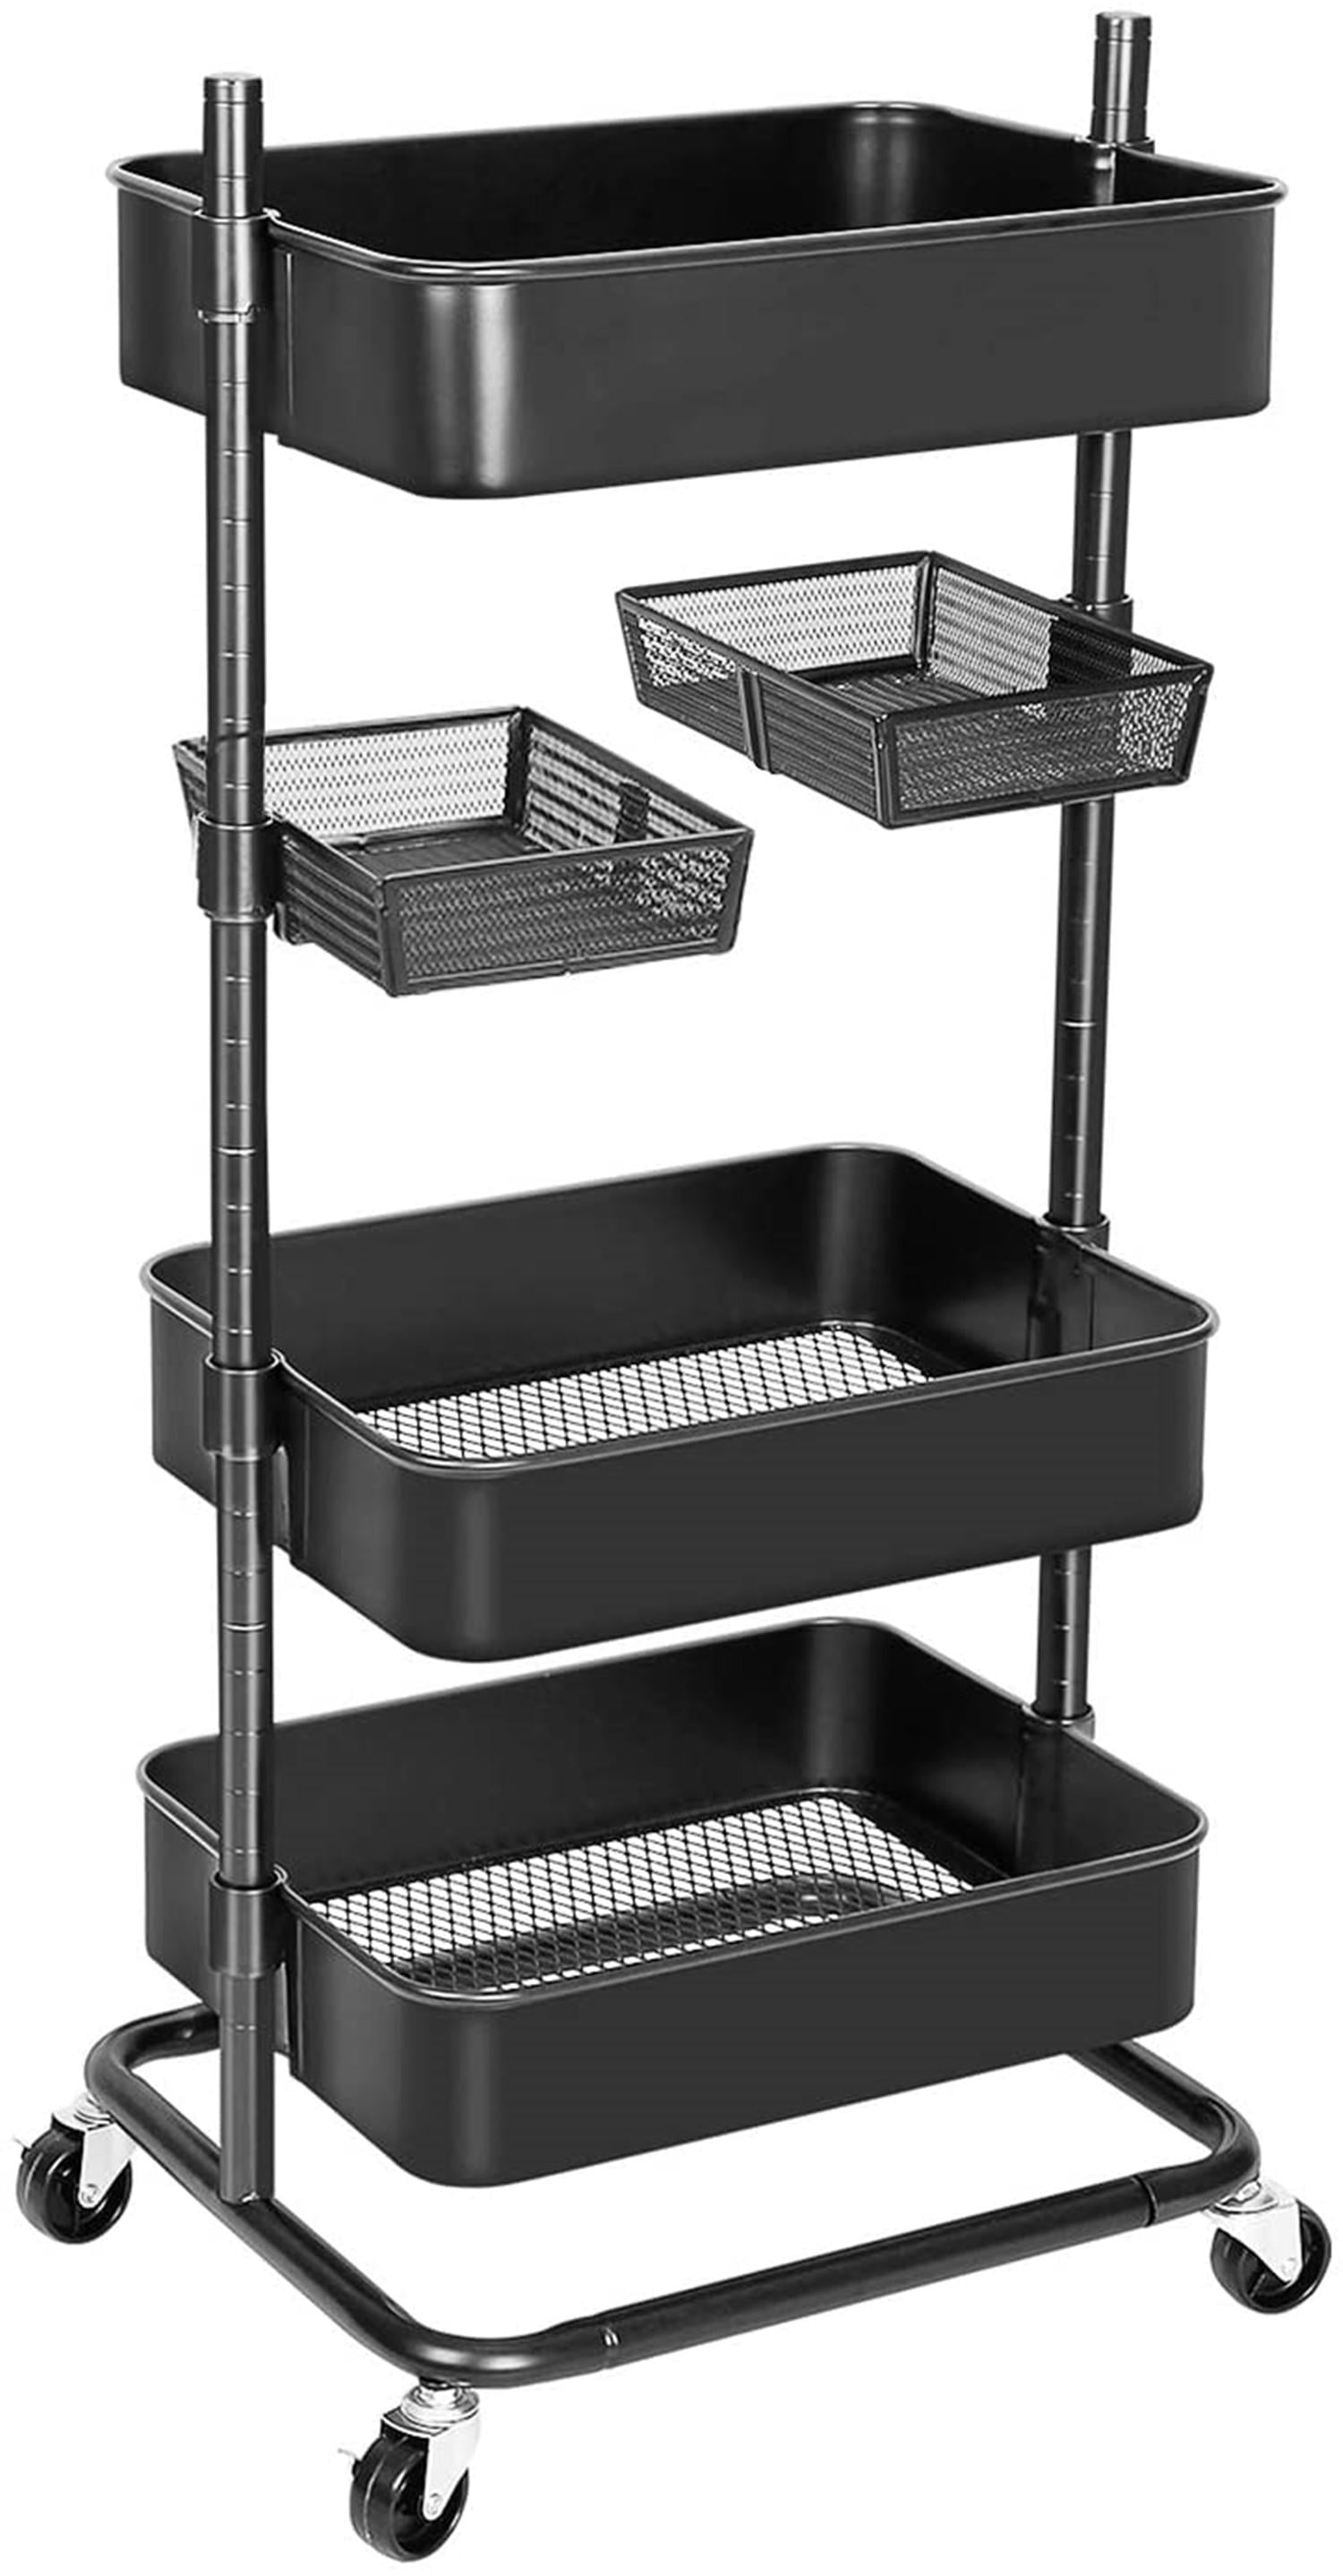 Anstar 3-Tier Rolling Utility Cart with 2 Rotatable Trays Adjustable Multifunction Storage Cart with Lockable Wheels Easy Assembly Makeup Cart Trolley Cart for Kitchen Bathroom Garage Salon (Black)